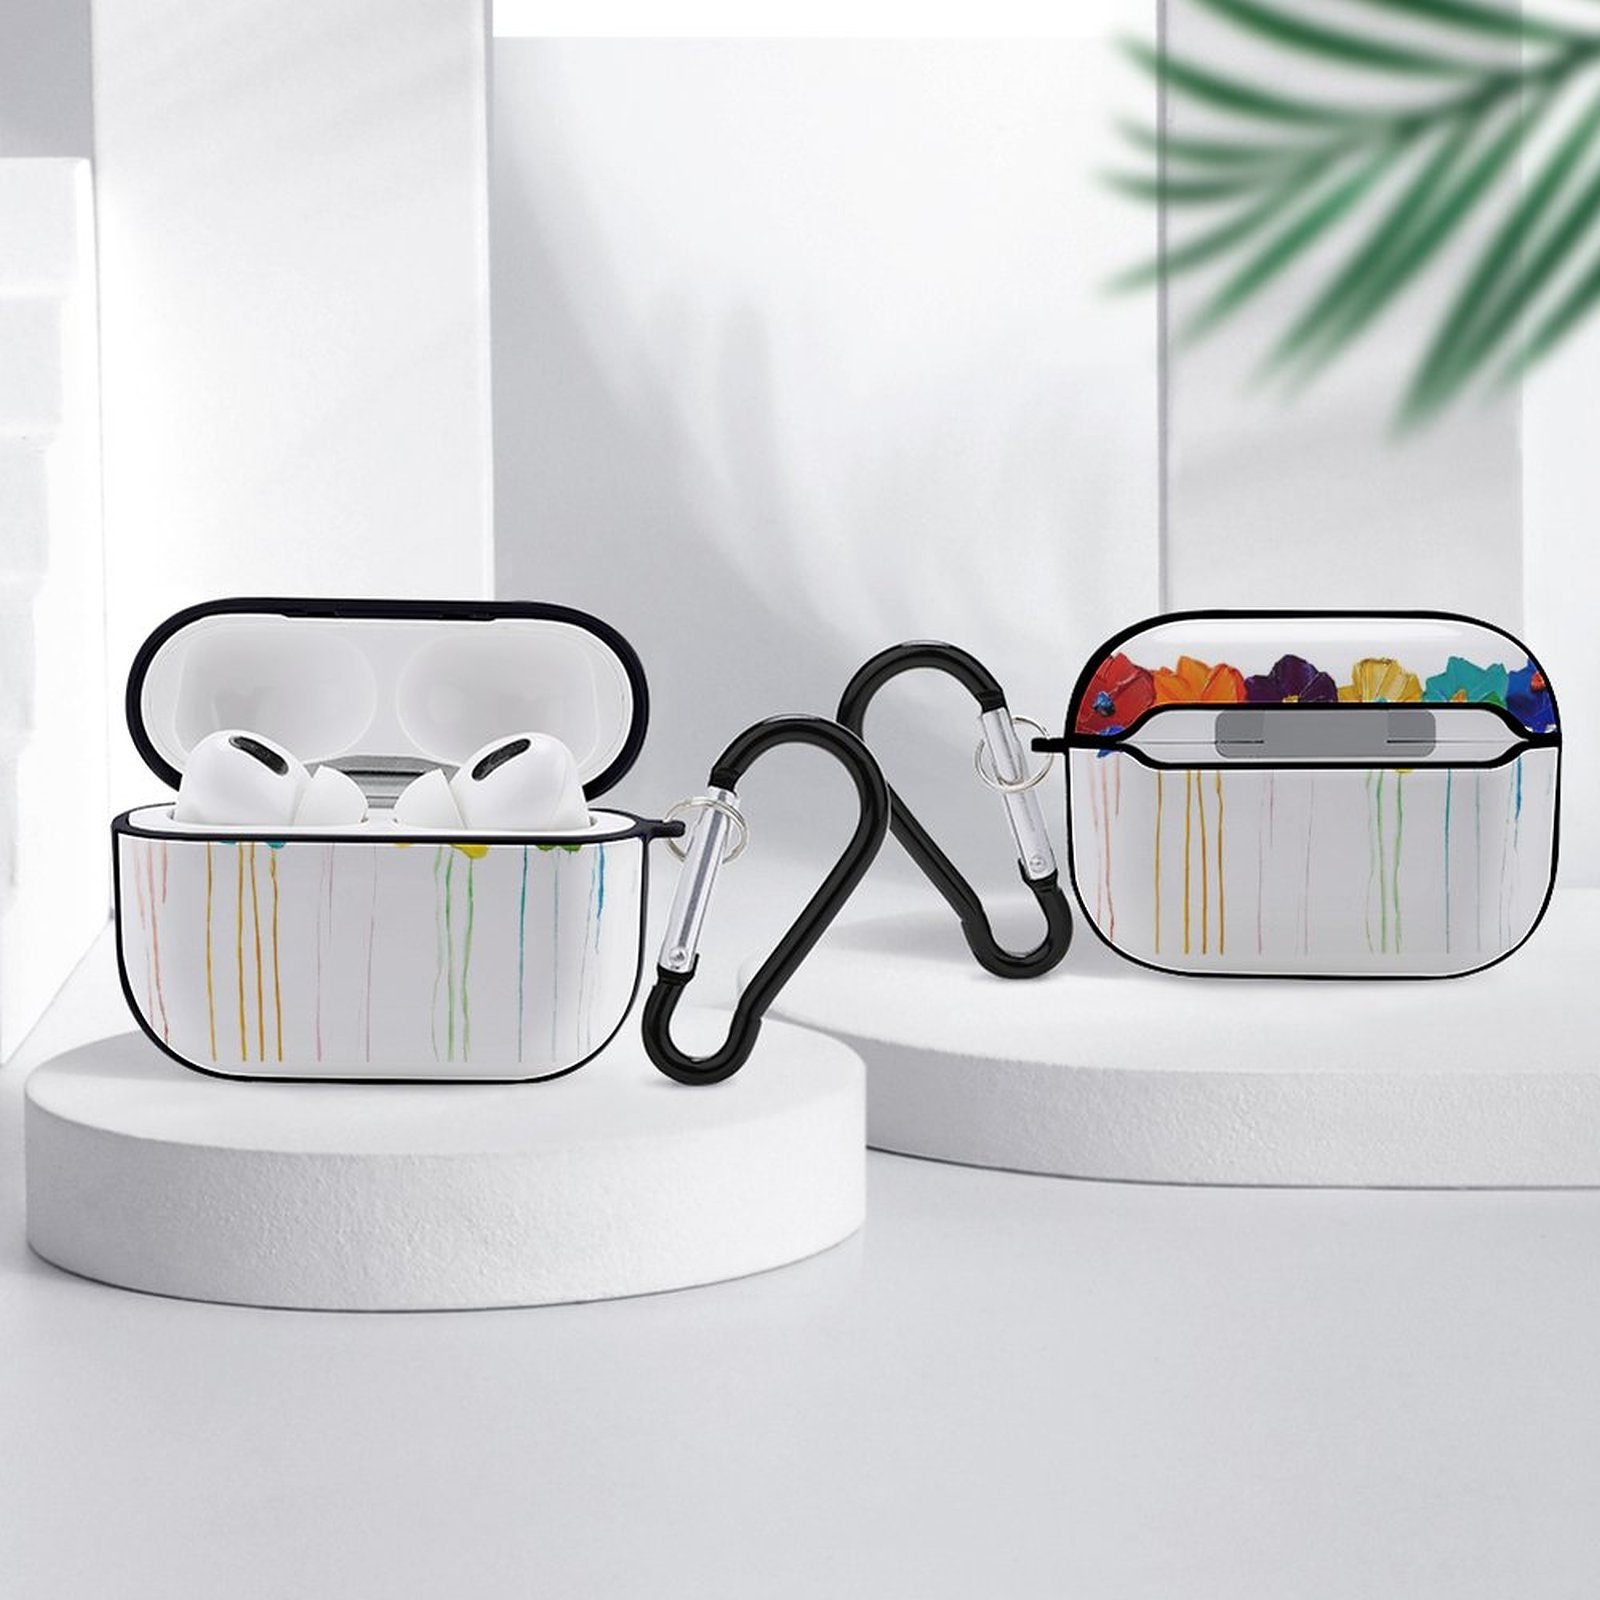 Technology and fashion collide with these stylish designer AirPods cases